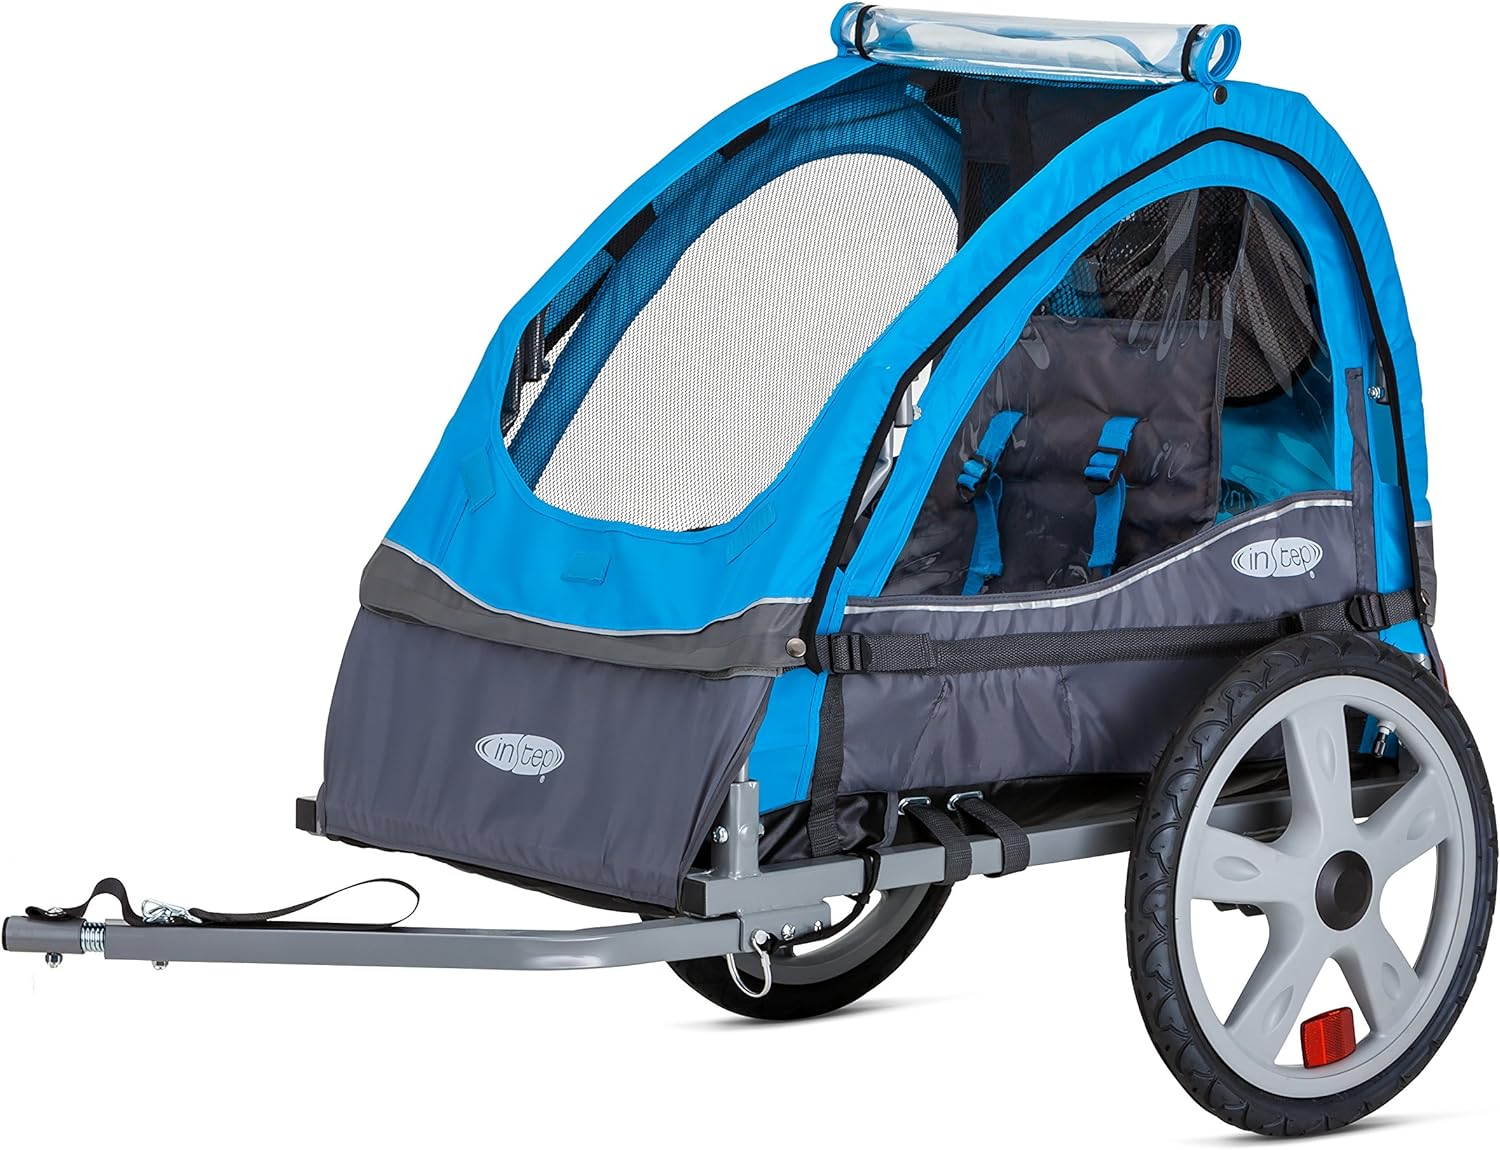 Instep Bike Trailer for Toddlers, Kids, 2-In-1 Canopy Carrier, Single Seat Bike Trailer, Blue